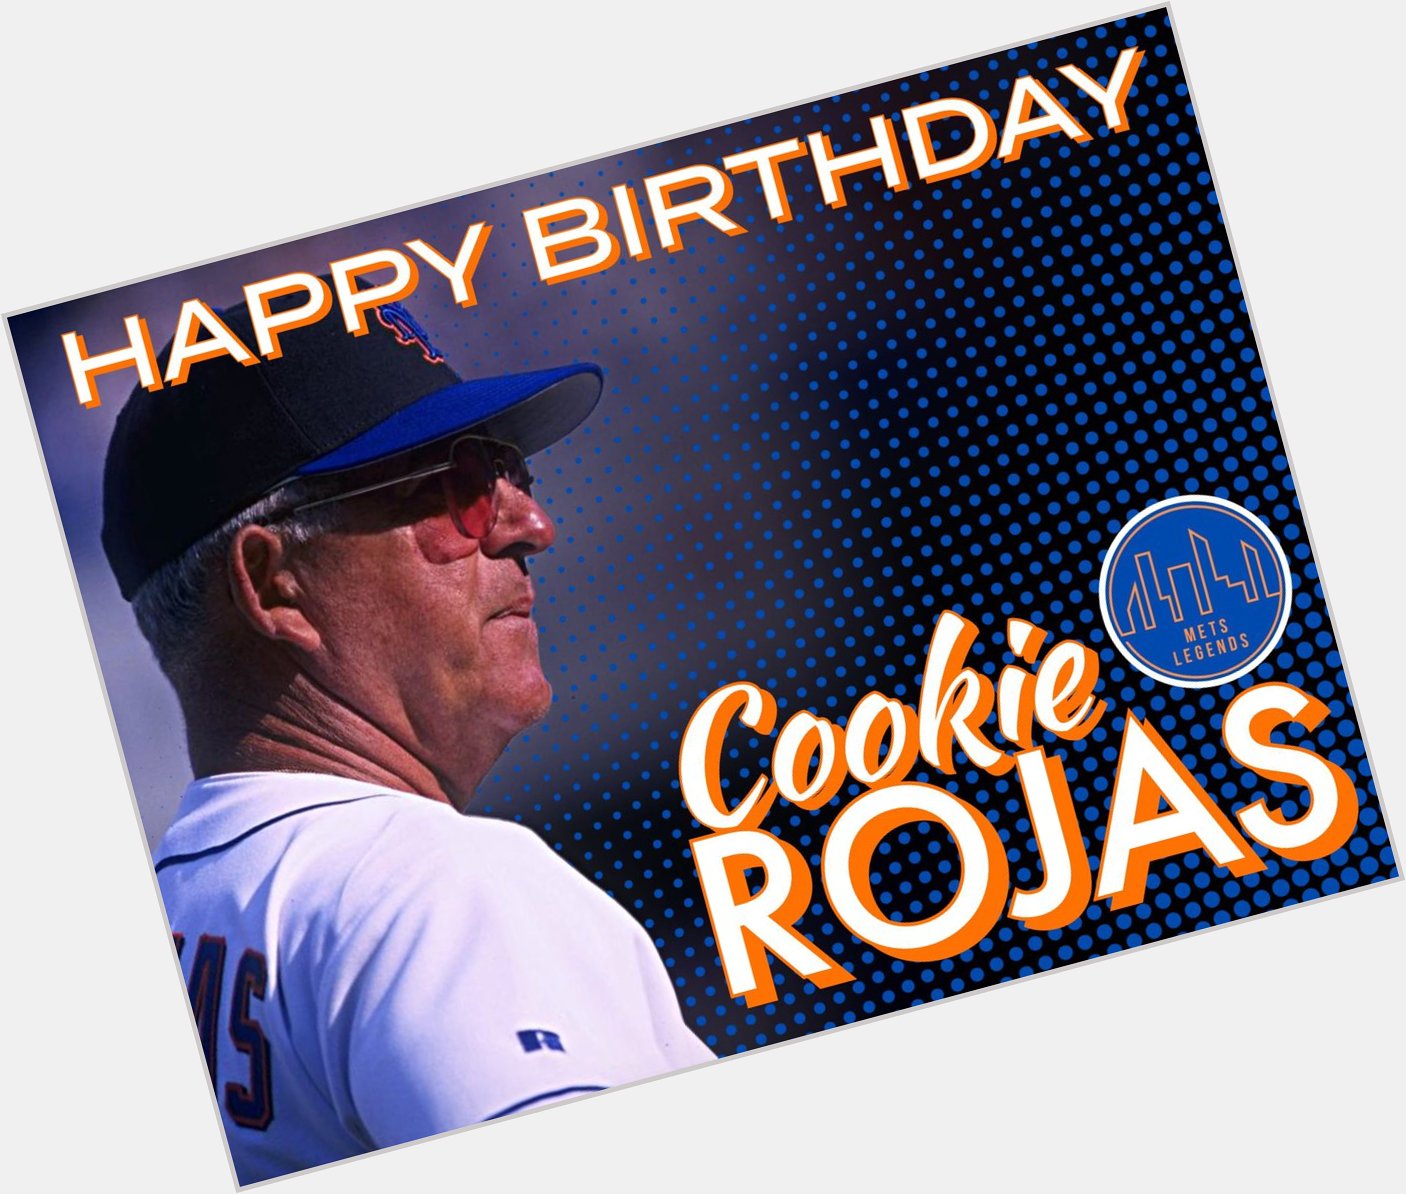 Happy Birthday to former third base coach, Cookie Rojas! 